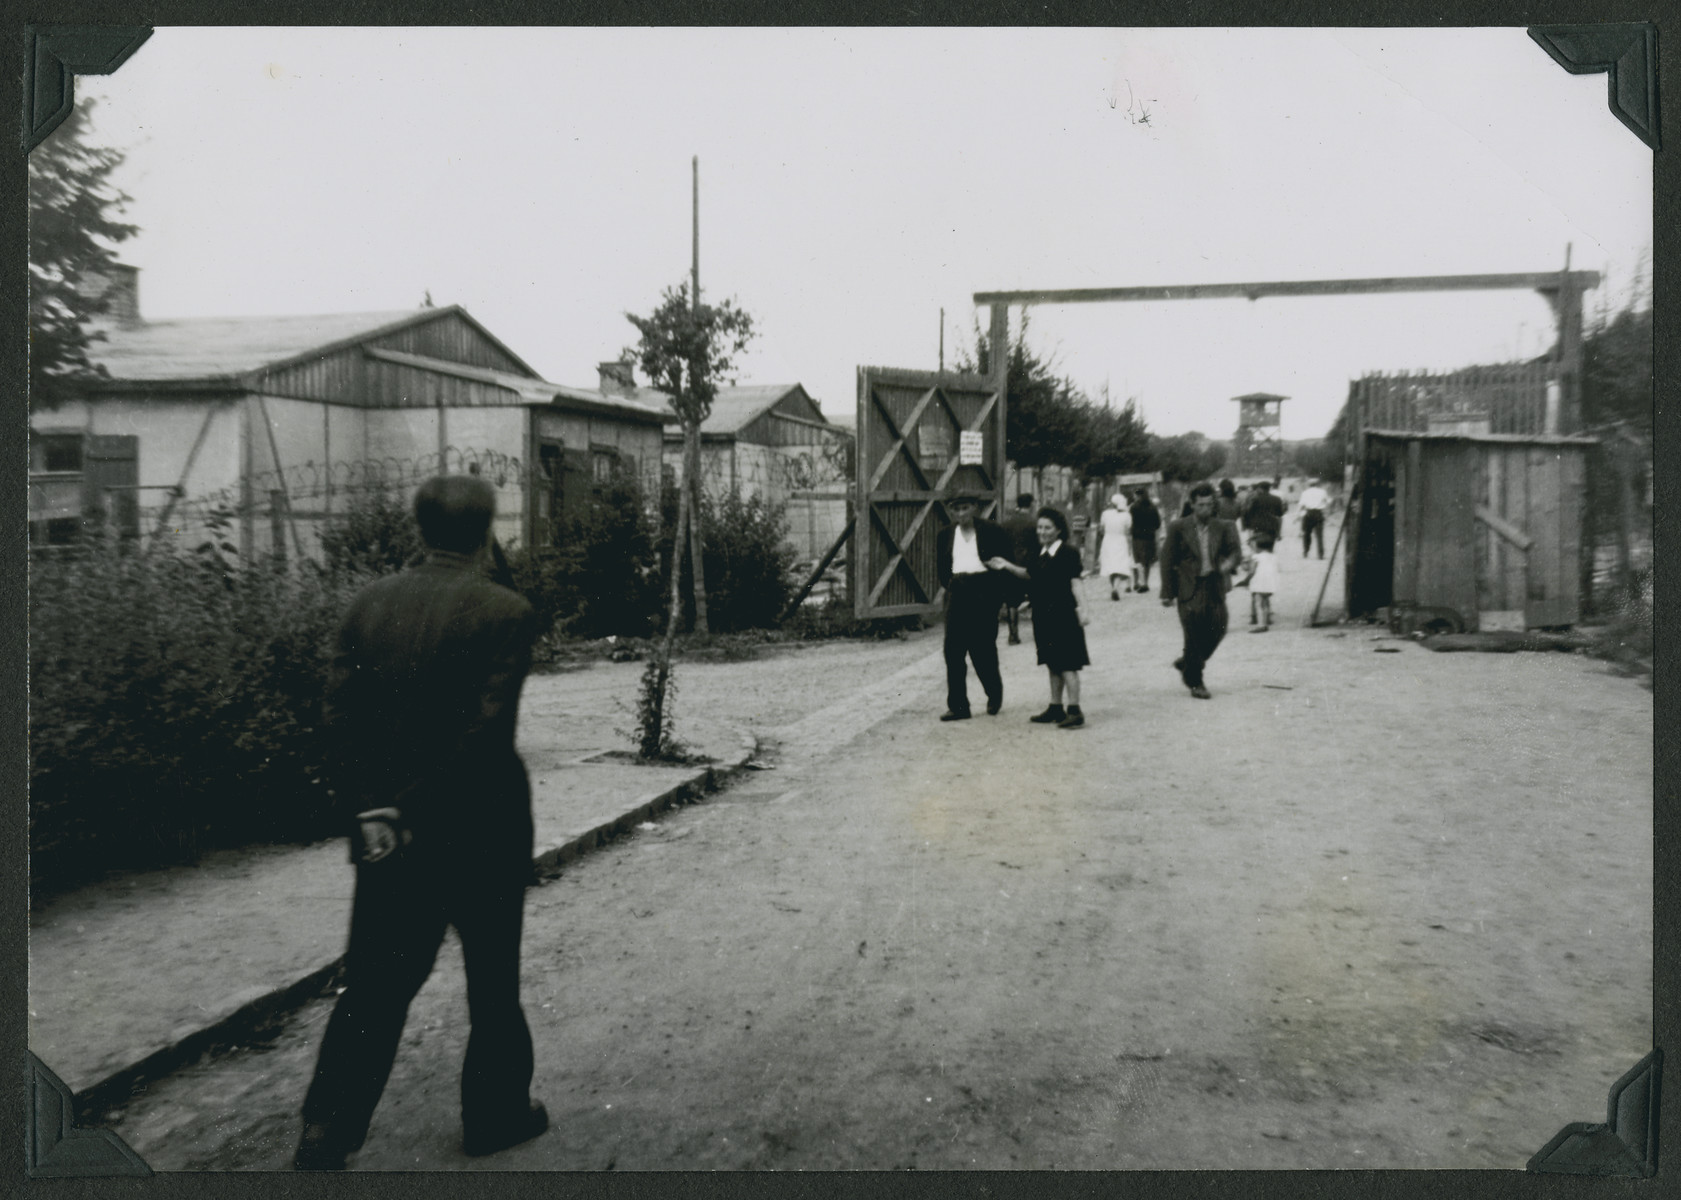 Jewish displaced persons enter the main gate of the Ziegenhain displaced persons camp.

The original caption reads: "Ziegenhain.  This is the gate for refugees.  Enter here and you shall suffer. -- the inner gate of the camp."